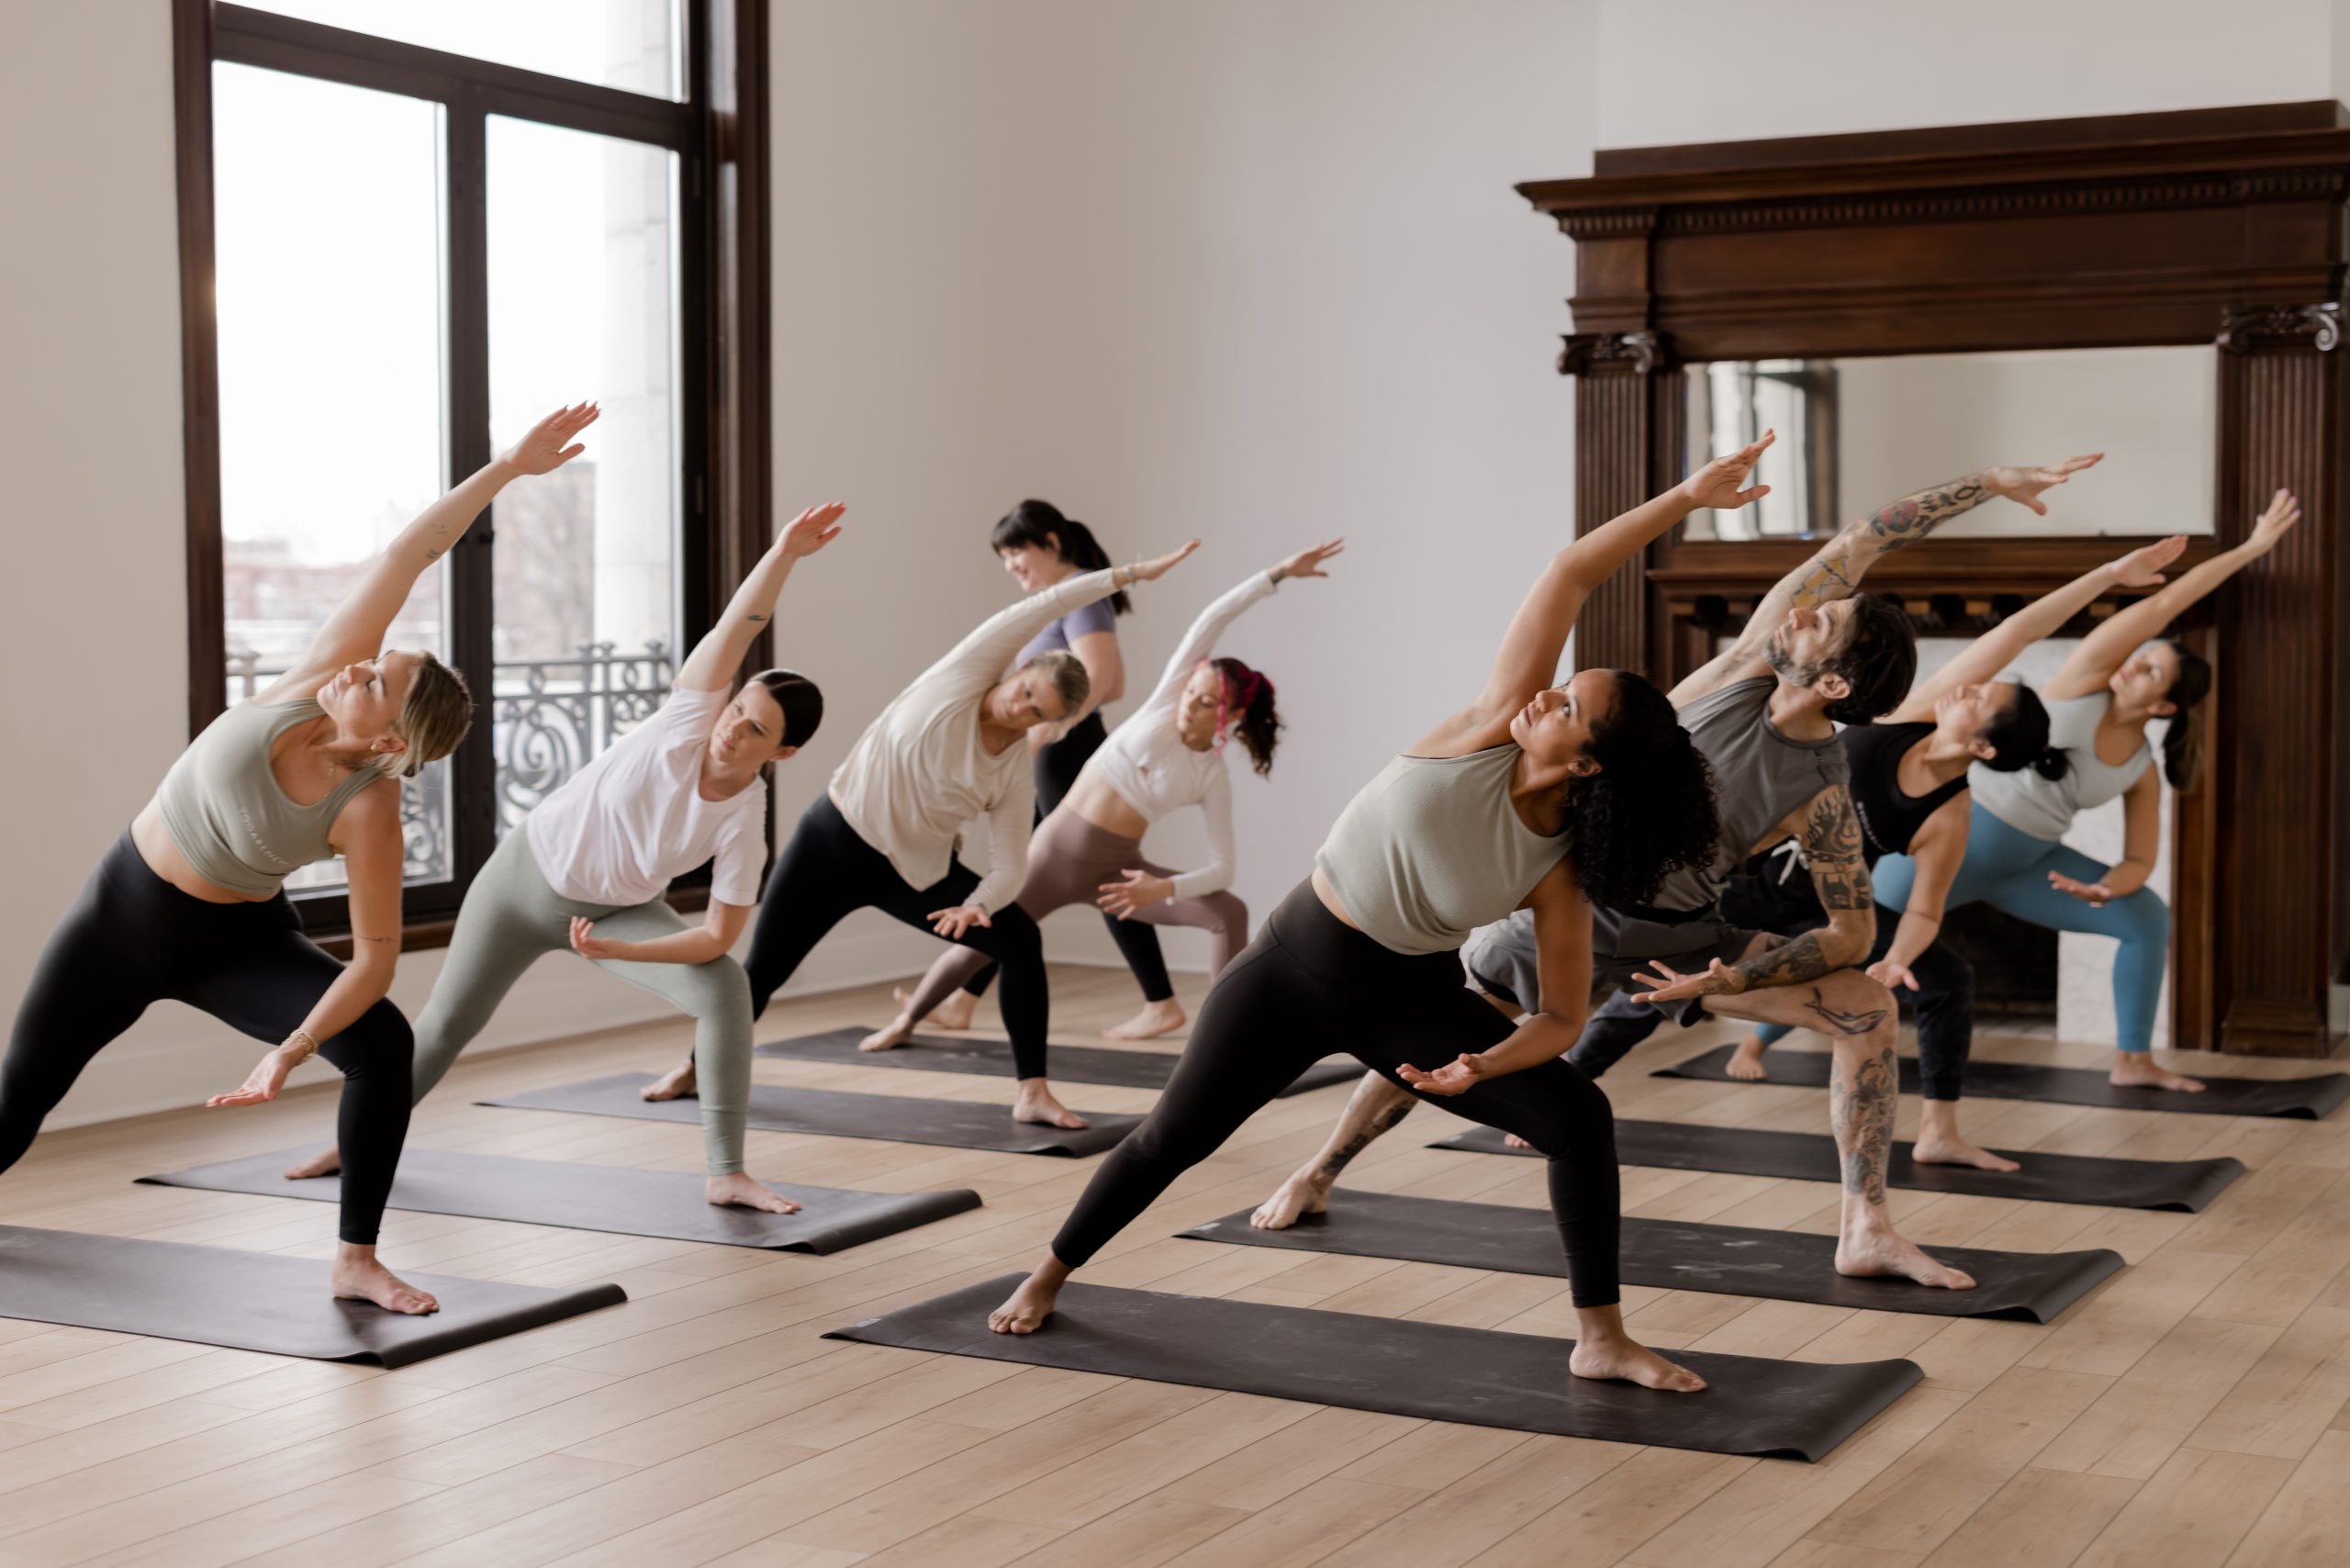 How To Sequence A Yoga Class - My Vinyasa Practice